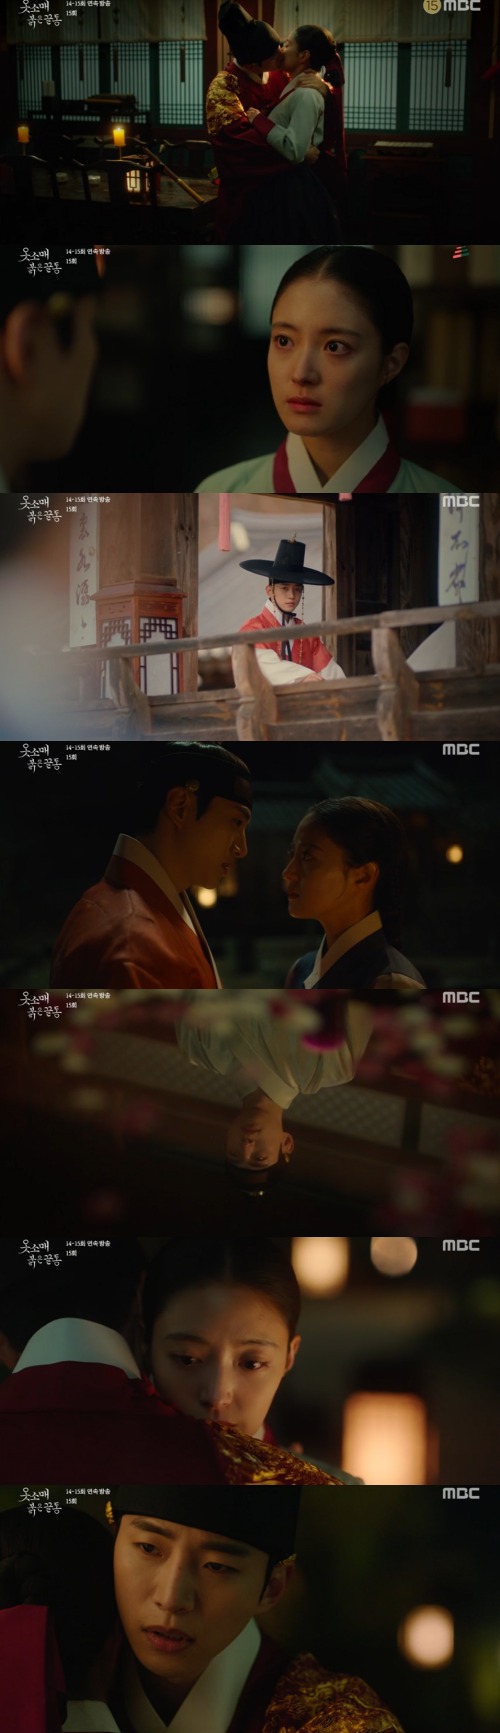 Seoul = = Lee Se-young, who was only pushing Lee Joon-ho, Red End of Clothes Retail, confirmed Lee Joon-hos sincerity and expressed his heart.In MBCs Golden Earth Drama, Red End of Clothes Retail (playplay by Jeong Hae-ri/directed by Jung Ji-in and Song Yeon-hwa), Lee Joon-ho and Lee Se-young (played by Lee Se-young) hurt each other with their words.Go away before dawn tomorrow, which means youre going to get out of here, dont show up in my eyes again, said Iacid silver.Seongdeokim went back to his office without any reply and packed his baggage. Seo Sang-gung (Jang Hye-jin) persuaded him to ask for forgiveness, but Sungdeokim said, I do not want to do that.I still blame the King, he said. It is good. I can not treat the King as casually as before. The next day, Sung Duk-im left the palace.Iacid silver Sung Deok-im confirmed the exodus and said, You really left. You did not beg, you did not hang.I have never seen anything like you in my life. A year later, Isan and Sung Duk-im met at the house of the Chungyeon monarch (Kim Ion), who did not see it during the day but visited Sungdeok at night.Iacid silver I would have told you not to show up in front of me again, but I break the name of the king without any hesitation, he asked about the paper found in the remains of Youngbin.I dare to show up and ask, said Sung Duk-im. The Blue Monarch is the sister of the King, so sometimes he will come here.Iacid silver Furious in the arrogant attitude of Sung Duk-im, and Sung Duk-im confronted him to punish him properly.Iacid silver Sung Duk-ims clothes were held and said, I should solve your clothes.He also said that if he did not receive the dignity of The Concubine in a silver, he would be trapped in the back room and be despised by another Maybe she.Sung Duk-im was re-introduced as the Nine of The Concubine Hubin of Isan, where Sung Duk-im had the Hangung terminal delivered to Isan, and Sung Duk-im was embarrassed but could not disobey the name of Yukjeon.Is this what you came back to see? You seem to be okay.Is it good to be back? He said that he did not want to come back but he came back.If Iacid silver is not going to be released, I will be in the palace for a lifetime. As Maybe she, who has to look only at the wages, look at me who does not care for me and rot in the palace for a lifetime.Thats going to be punishable enough, he said harshly.It was reported that Hong Duk-ro (Kang Hoon) died. I received a suicide note from Iacid silver Hong Duk-ro.Hong Duk-ro confessed that he had lied when he had not saved the young separated from the gold medal, but he had lied.I asked if it was Sungdeok that tore the acid silver gold, and Sungdeokim asked, What would it be useful to bring out the old days? This was a definite answer to Isan.Iacid silver I can not be sorry for you, I have done what I have to do as a king, so I do not regret it.Even if I deceive you again, if I have to hurt you, I will do it. He added, That is not why I did not care. I cant say Im sorry, but I can say something else. Thank you. You saved me again and again. Thank you.When Sung Duk-im said nothing, Iacid silver turned around saying, What has changed once is irreversible. At this time, Sung Duk-im caught the back of the clothes of Isan.I embraced the acid silver holy virtue, which I confirmed was the same heart. I missed you.